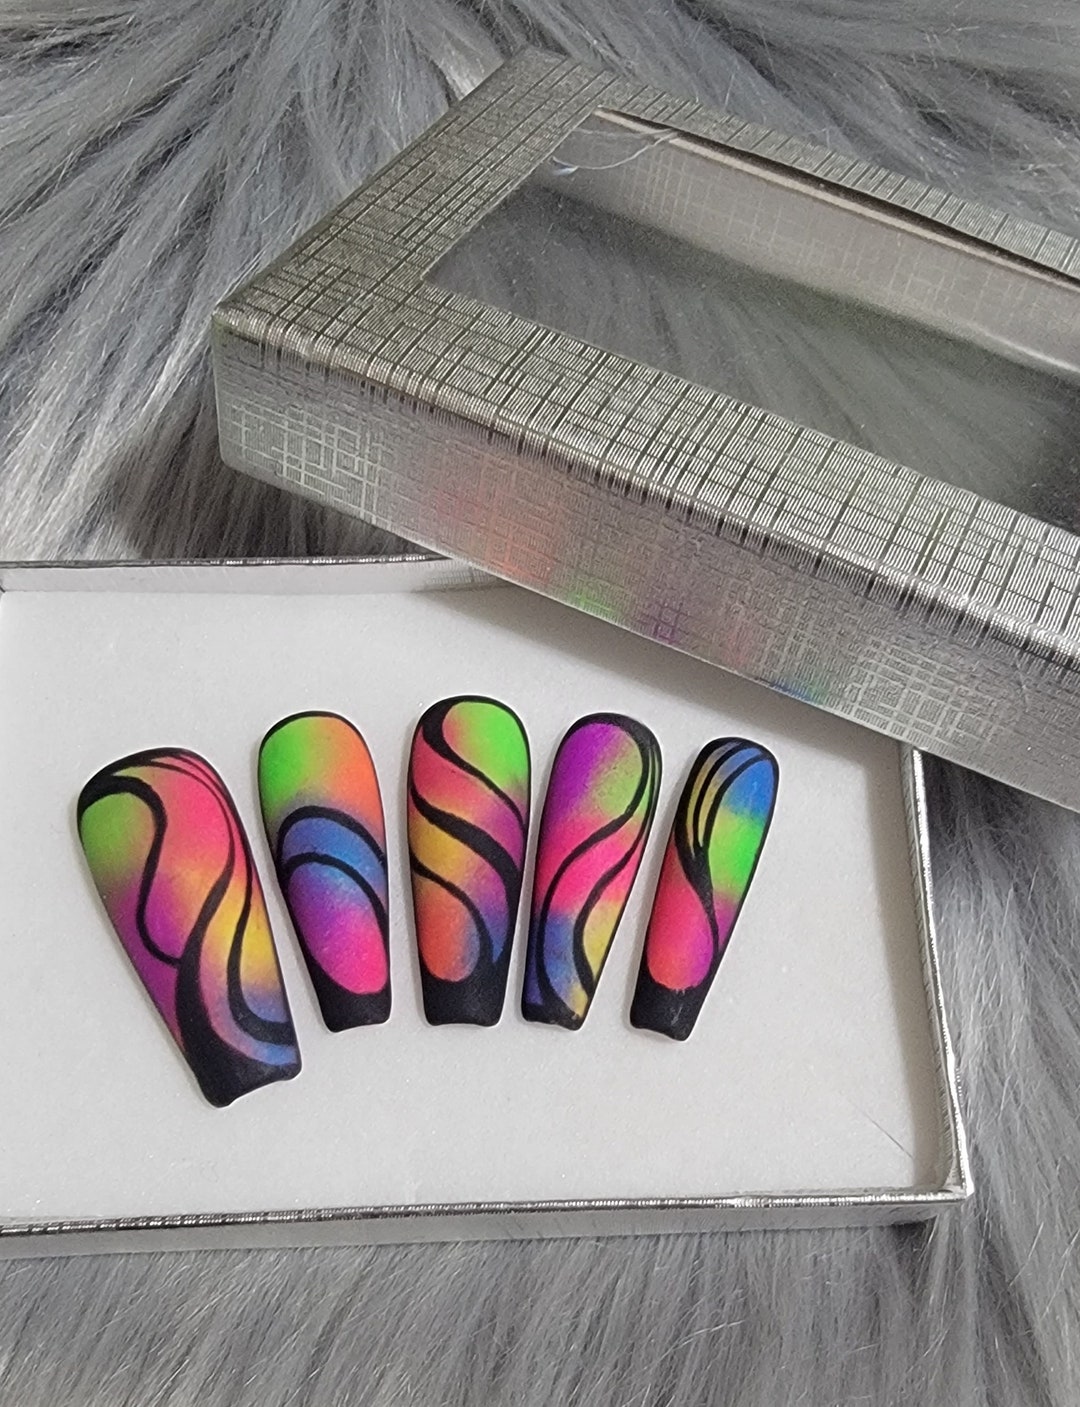 Neon Press-on Nails, Matte Rainbow Press-ons, Glue-on, Handpainted Nail ...